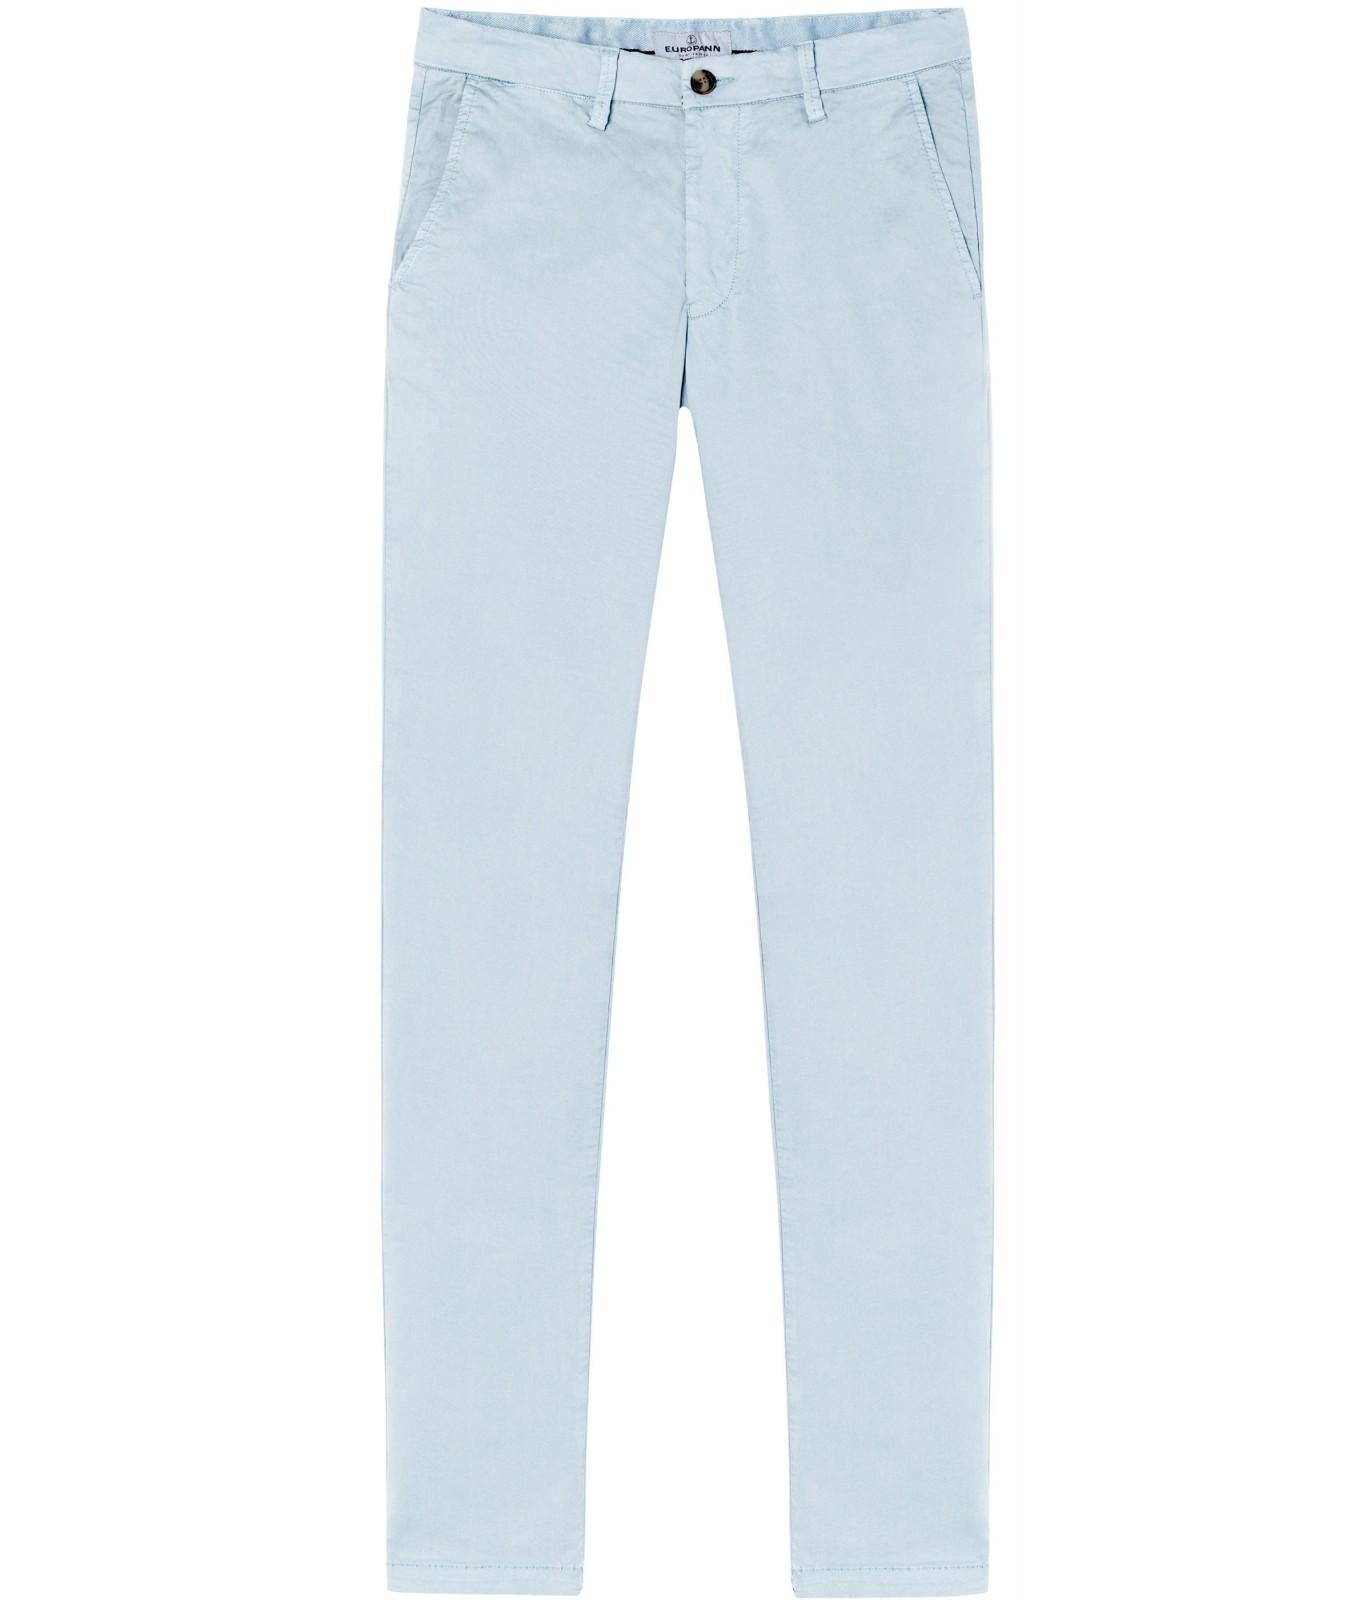 Buy Blue Trousers & Pants for Men by Marks & Spencer Online | Ajio.com